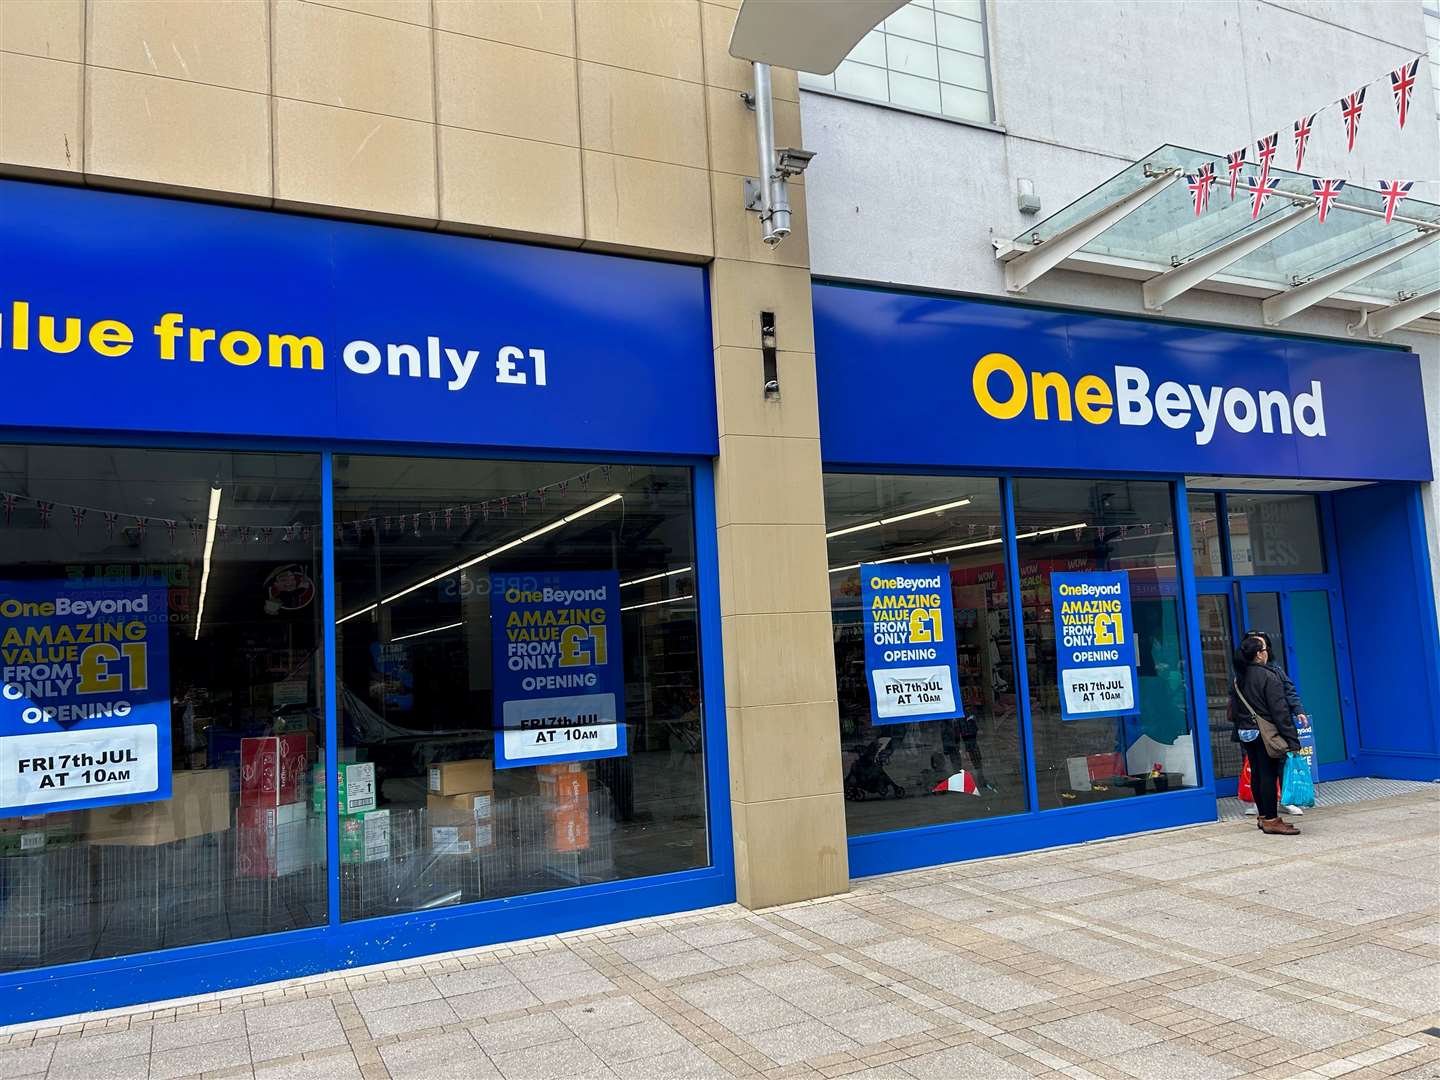 A new OneBeyond store looks set to open in Lynn this Friday